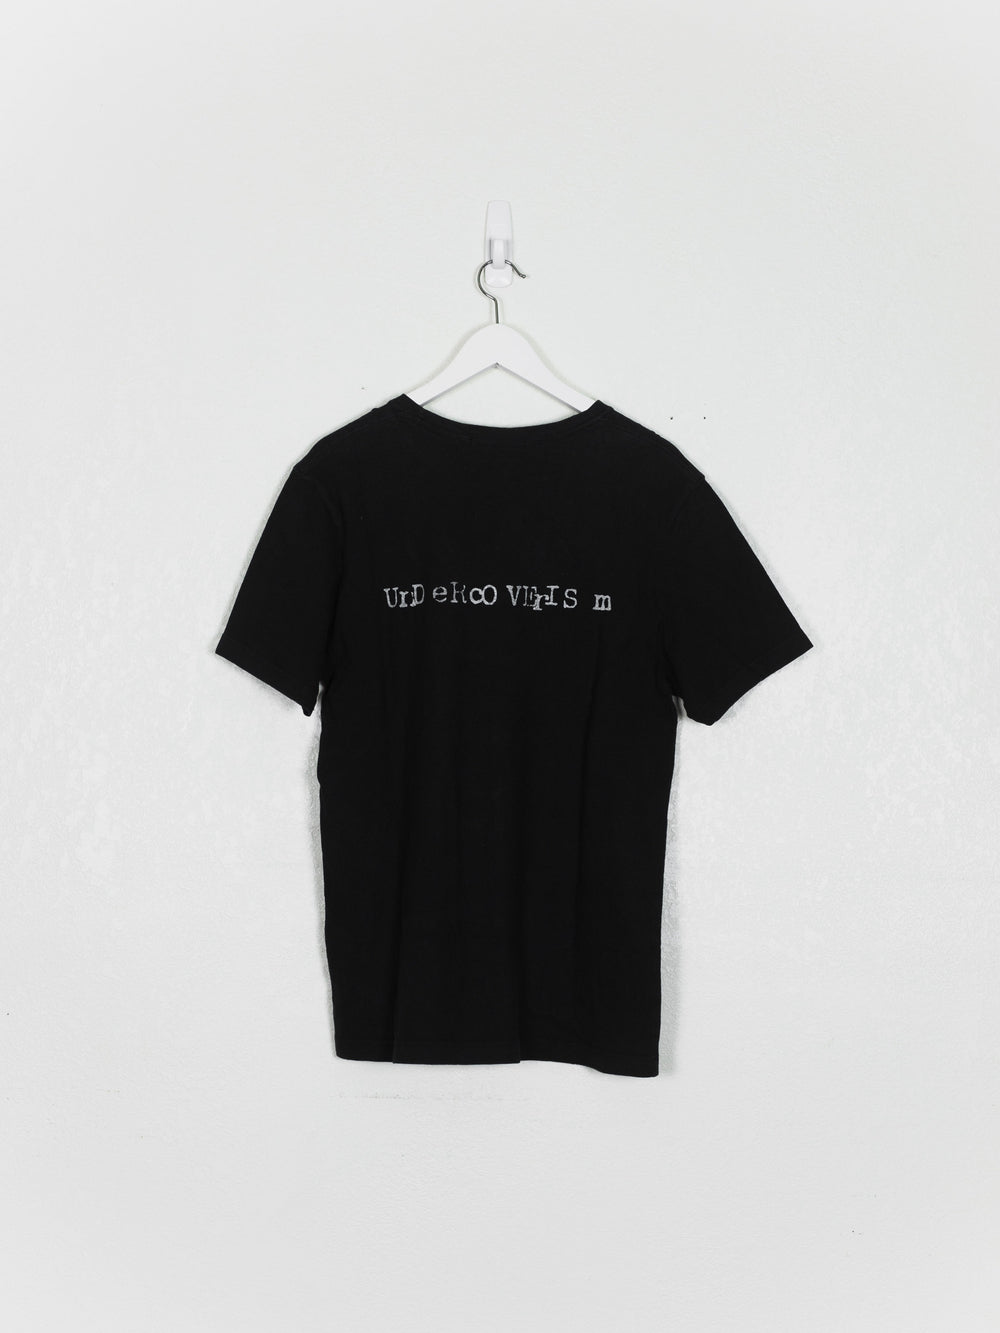 Undercover 1984 War is Peace Tee